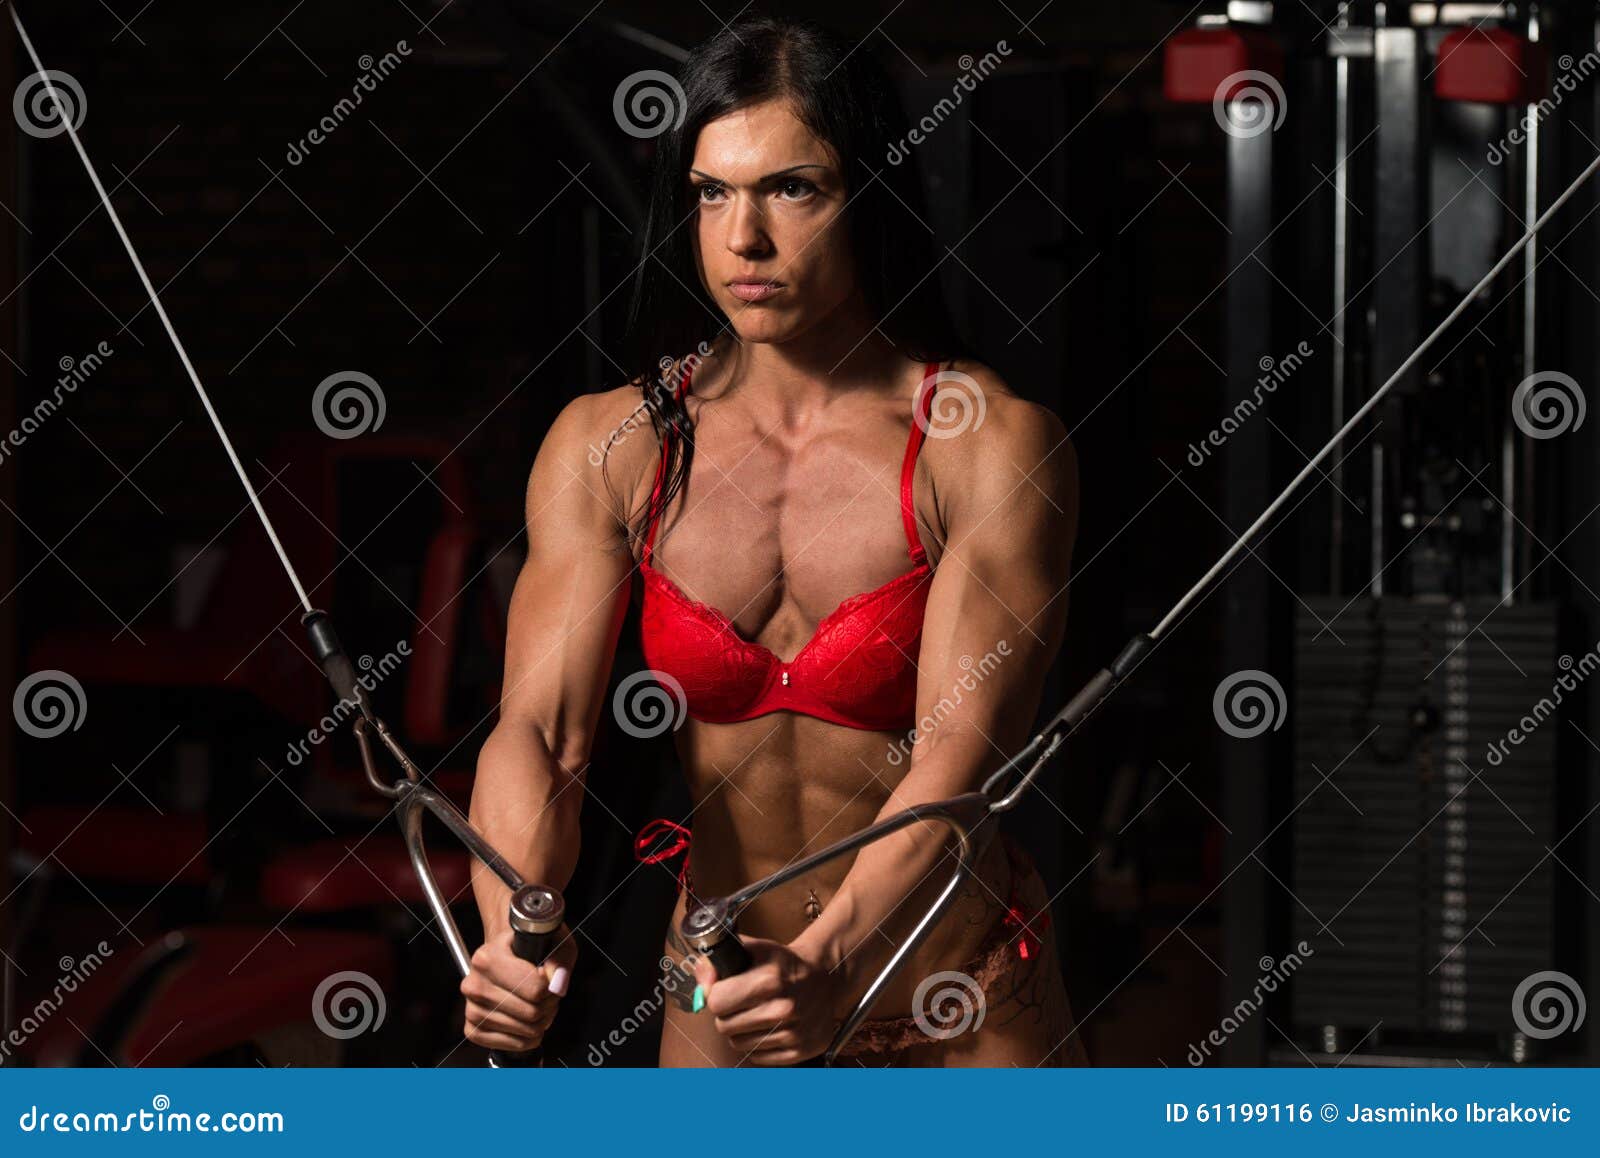 Chest Exercise in Underwear Stock Photo - Image of lifestyles